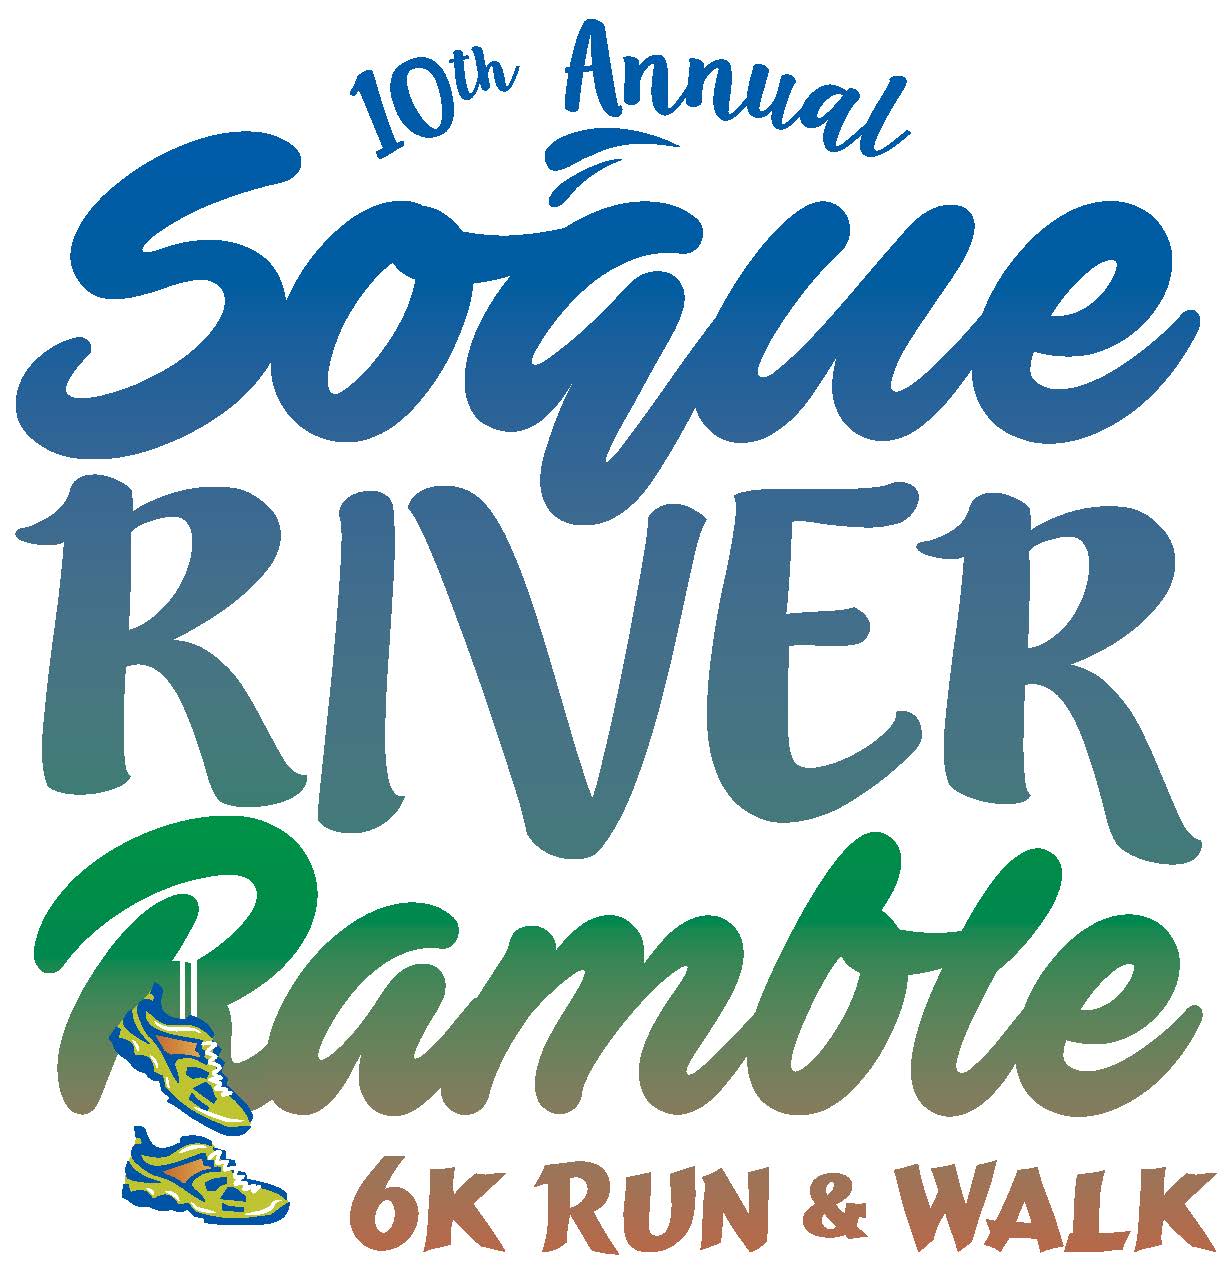 Registration for the 2016 Soque River Ramble is Open!